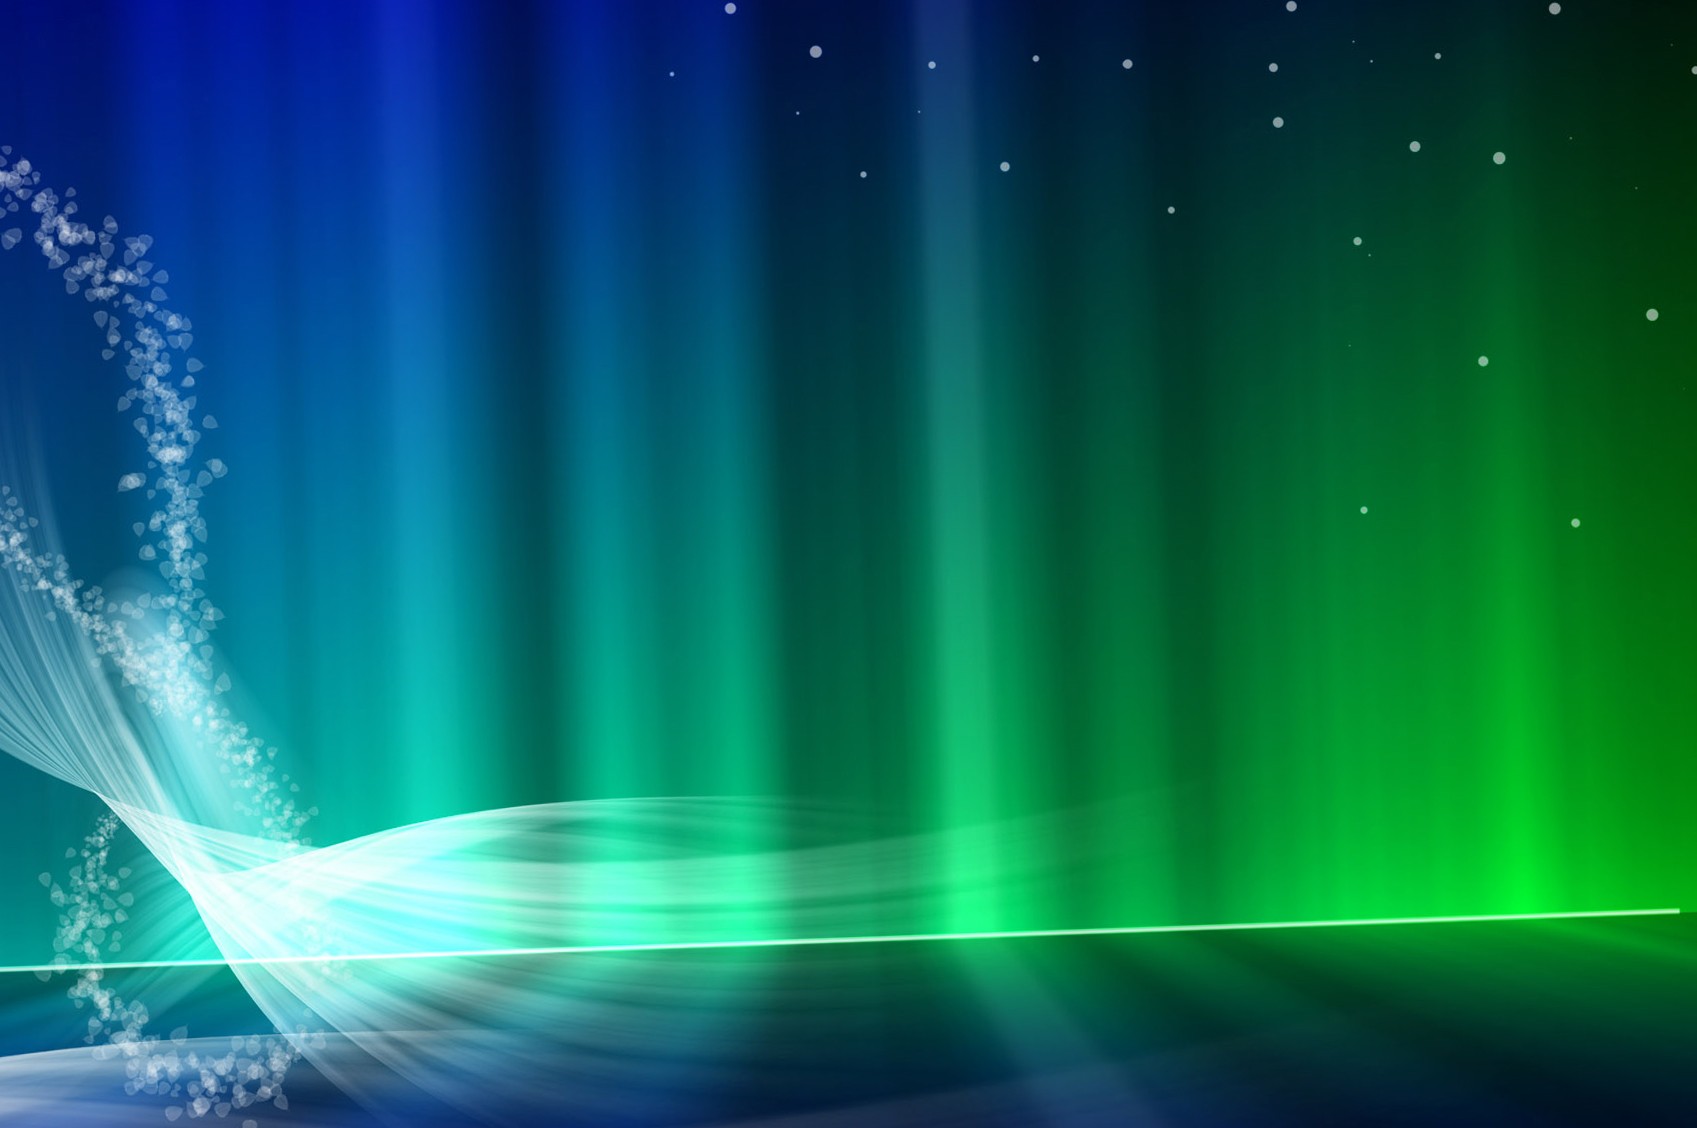 cool windows 10 wallpapers,blue,green,light,stage,sky